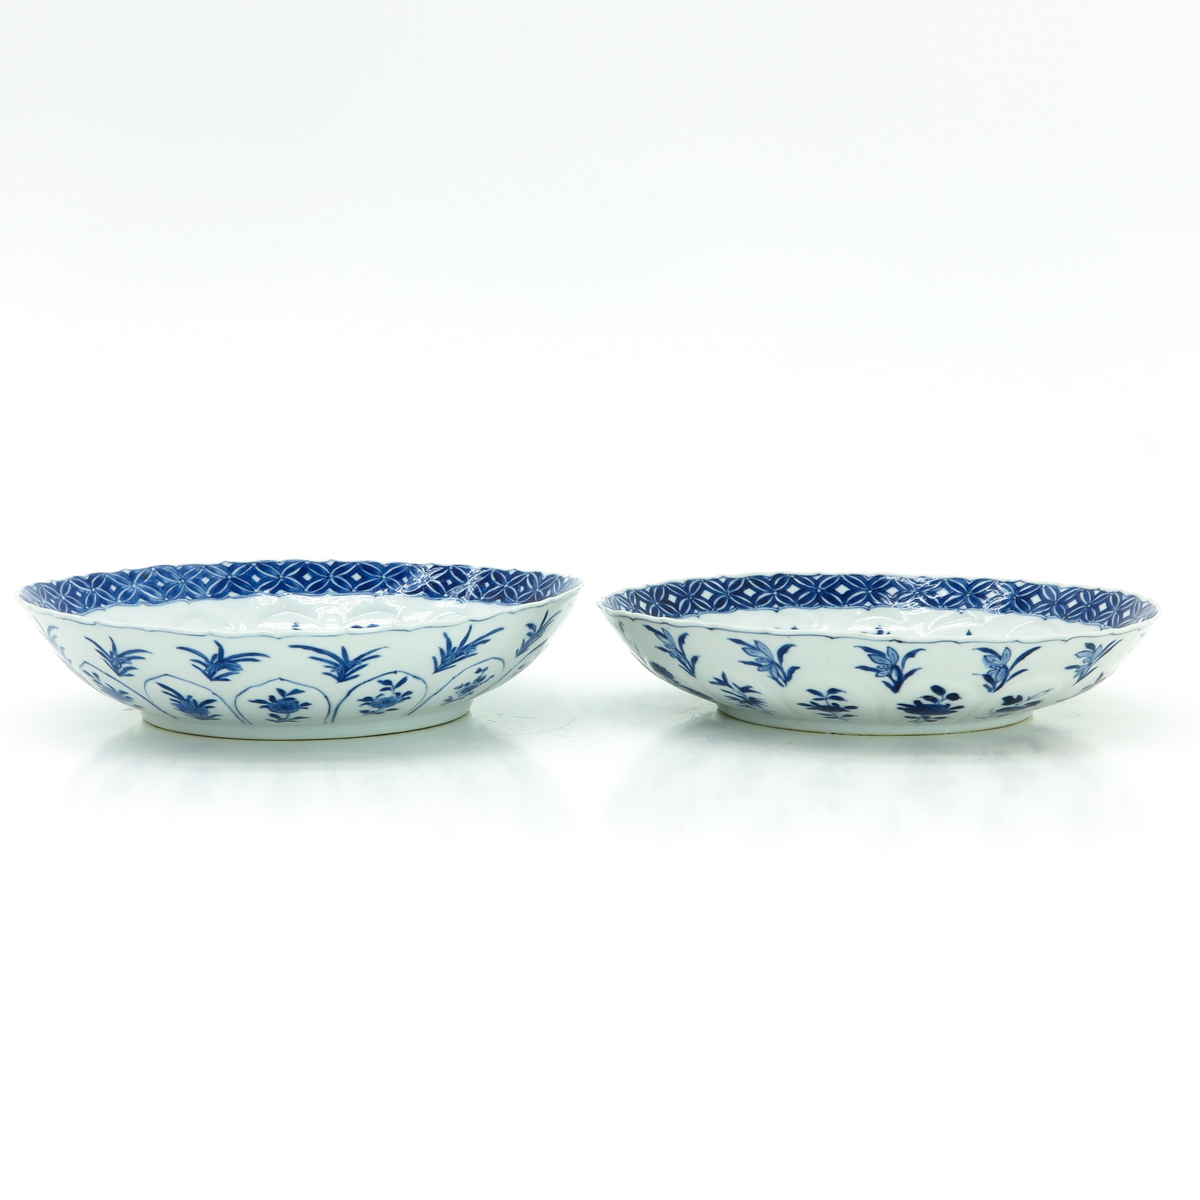 A Pair of Blue and White Decor Plates - Image 3 of 3